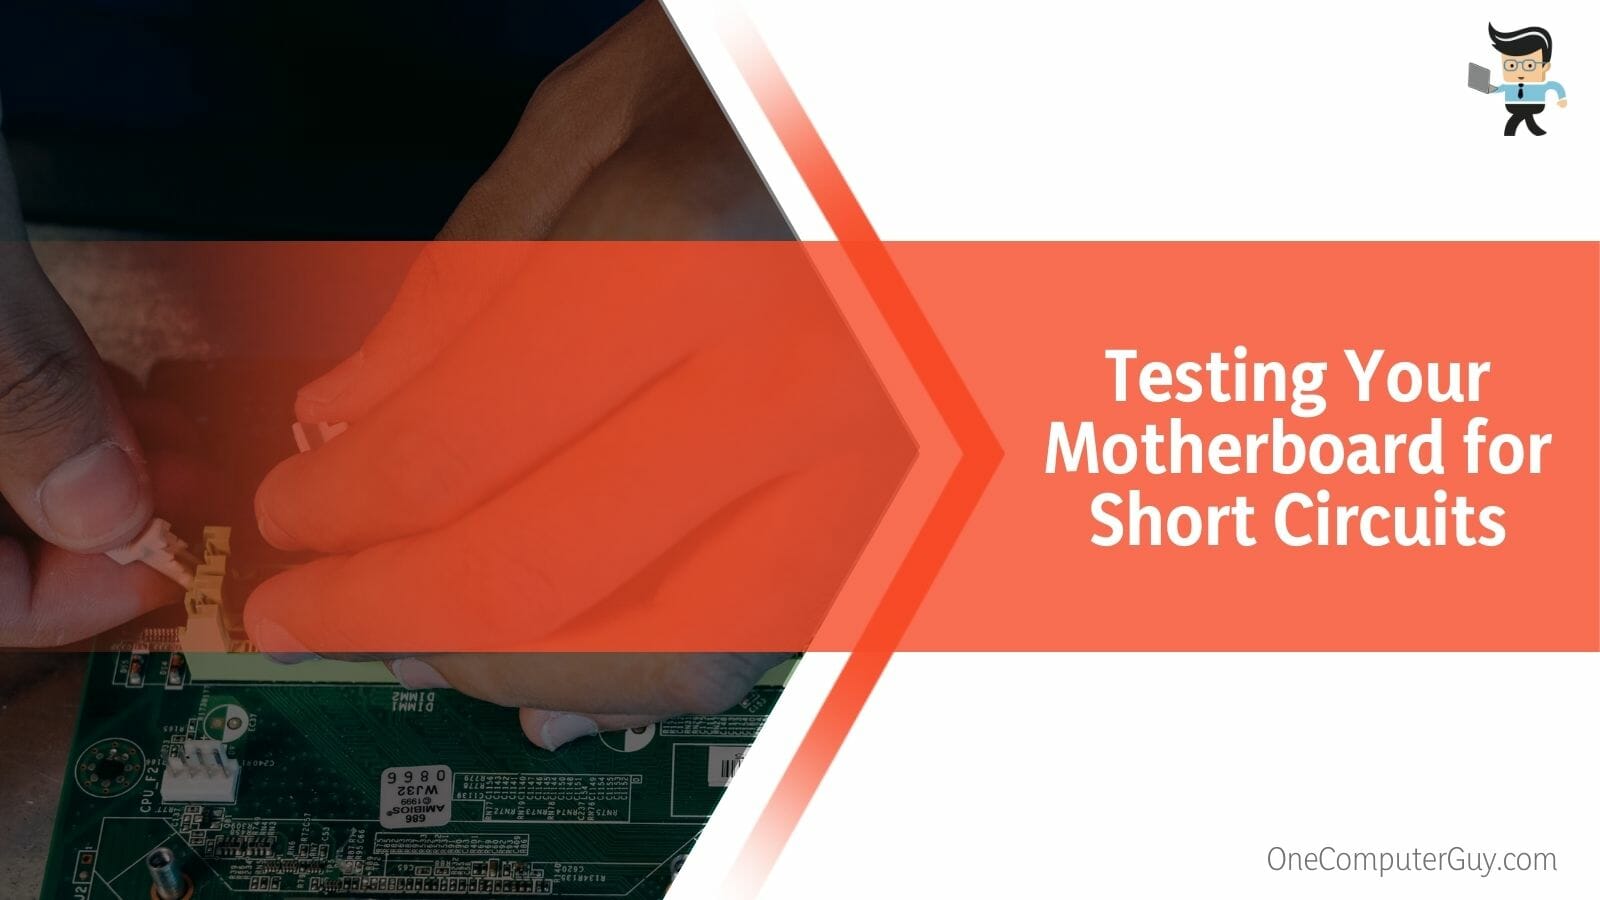 Testing Your Motherboard for Short Circuits